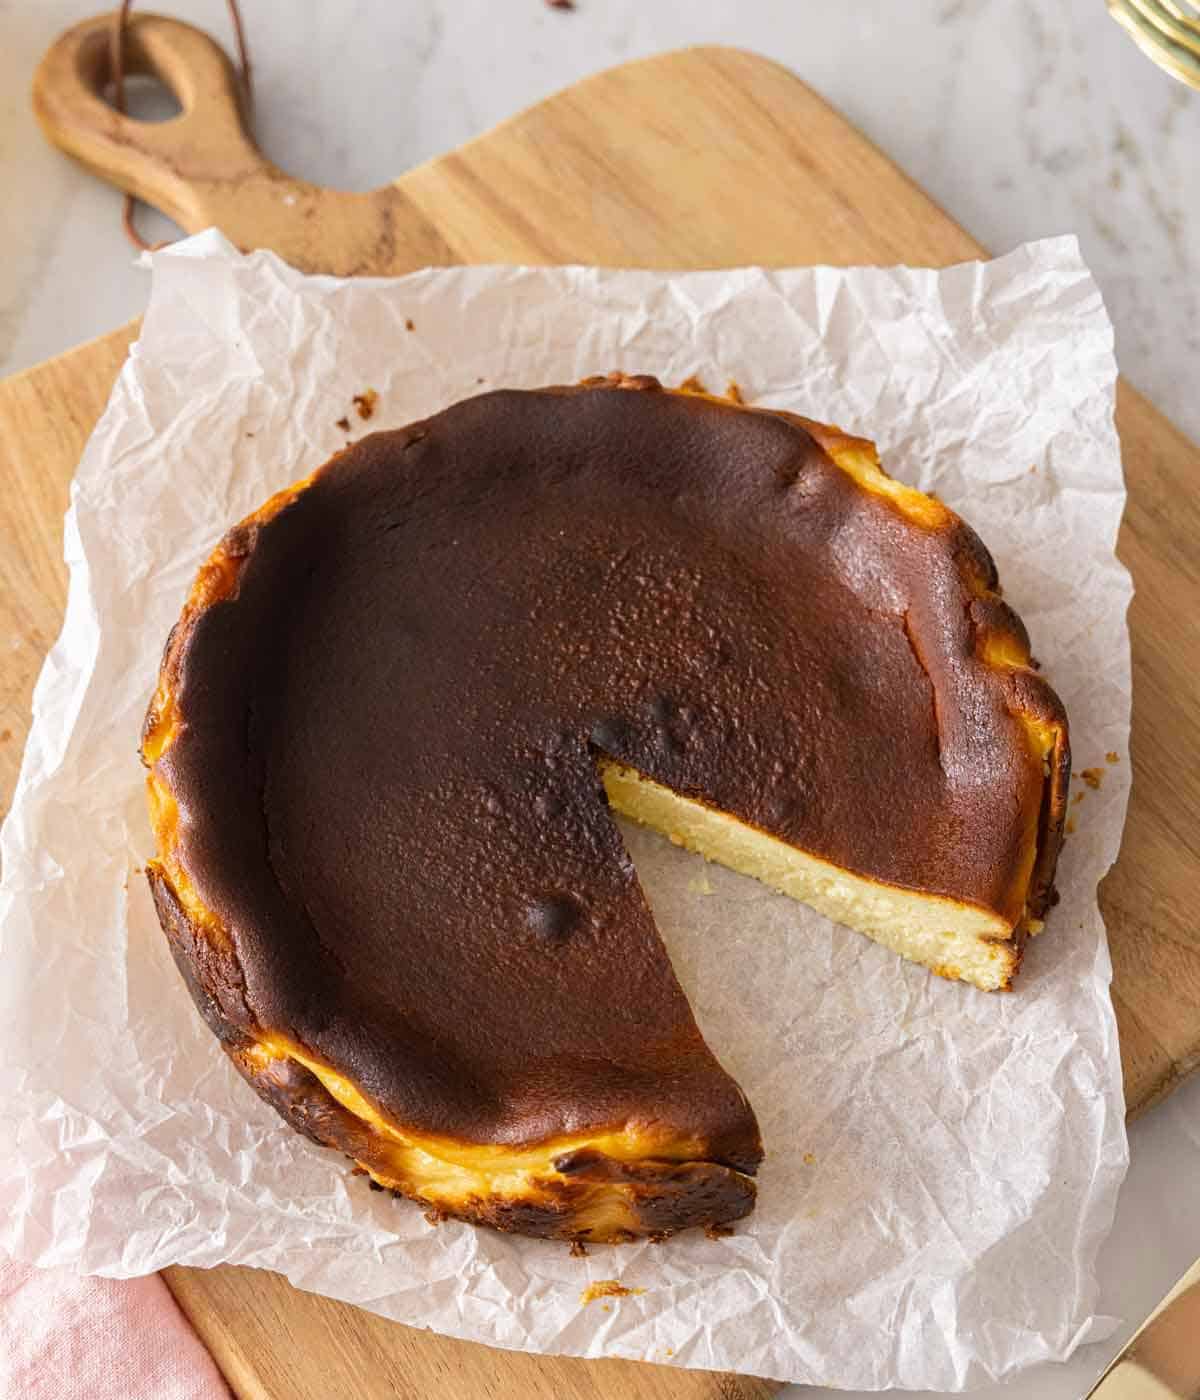 Overhead view of a basque cheesecake with a slice cut out.